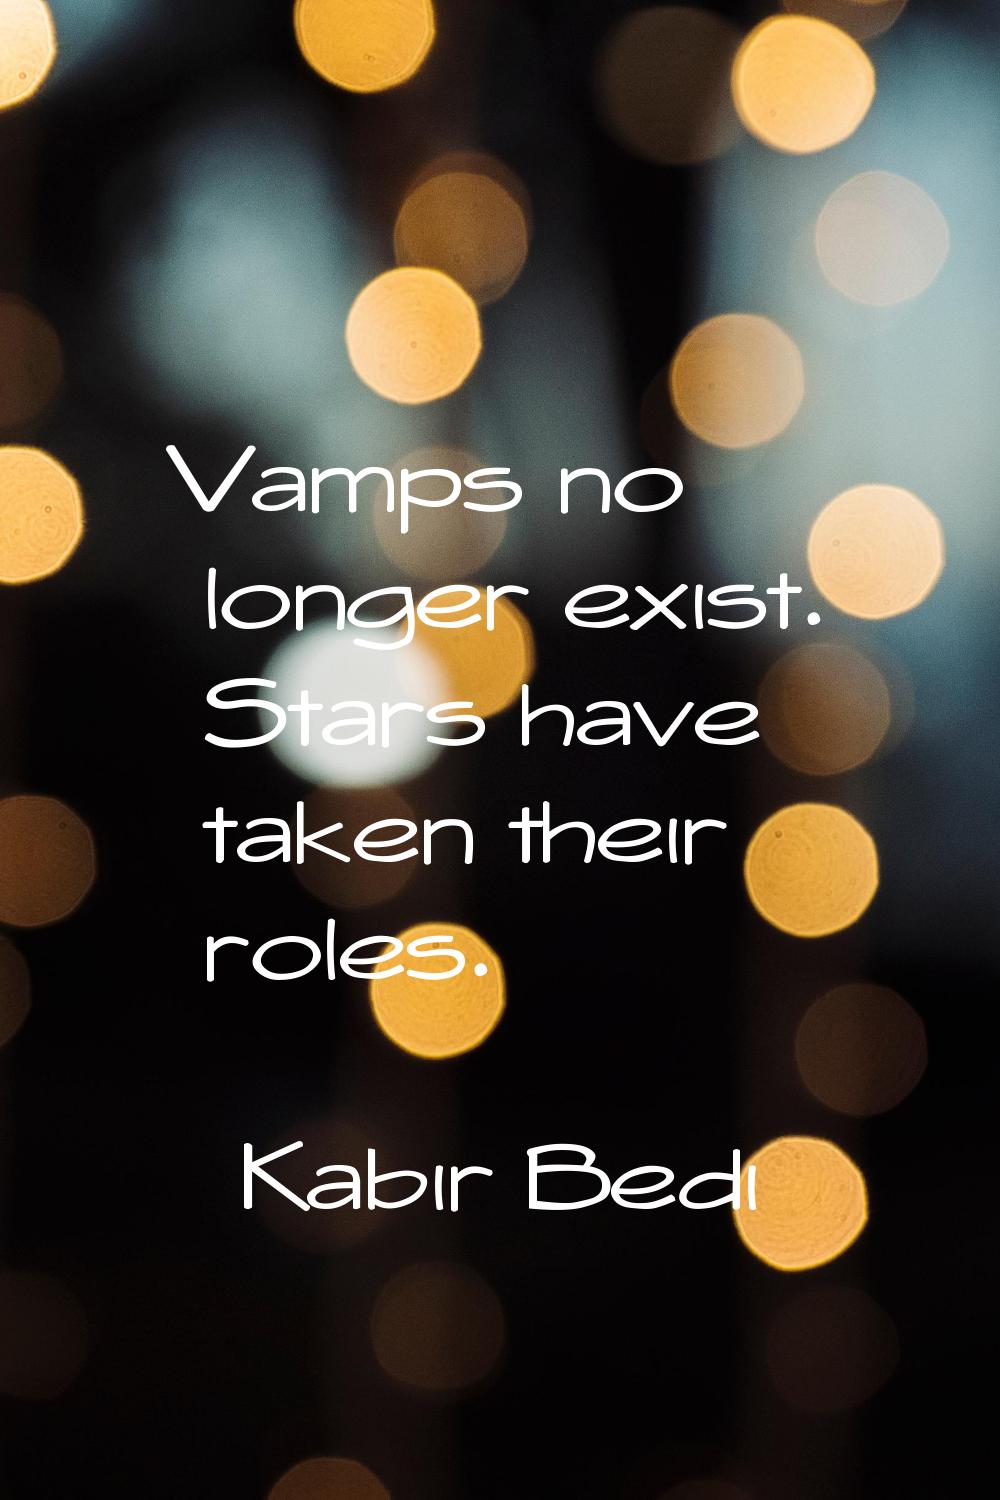 Vamps no longer exist. Stars have taken their roles.